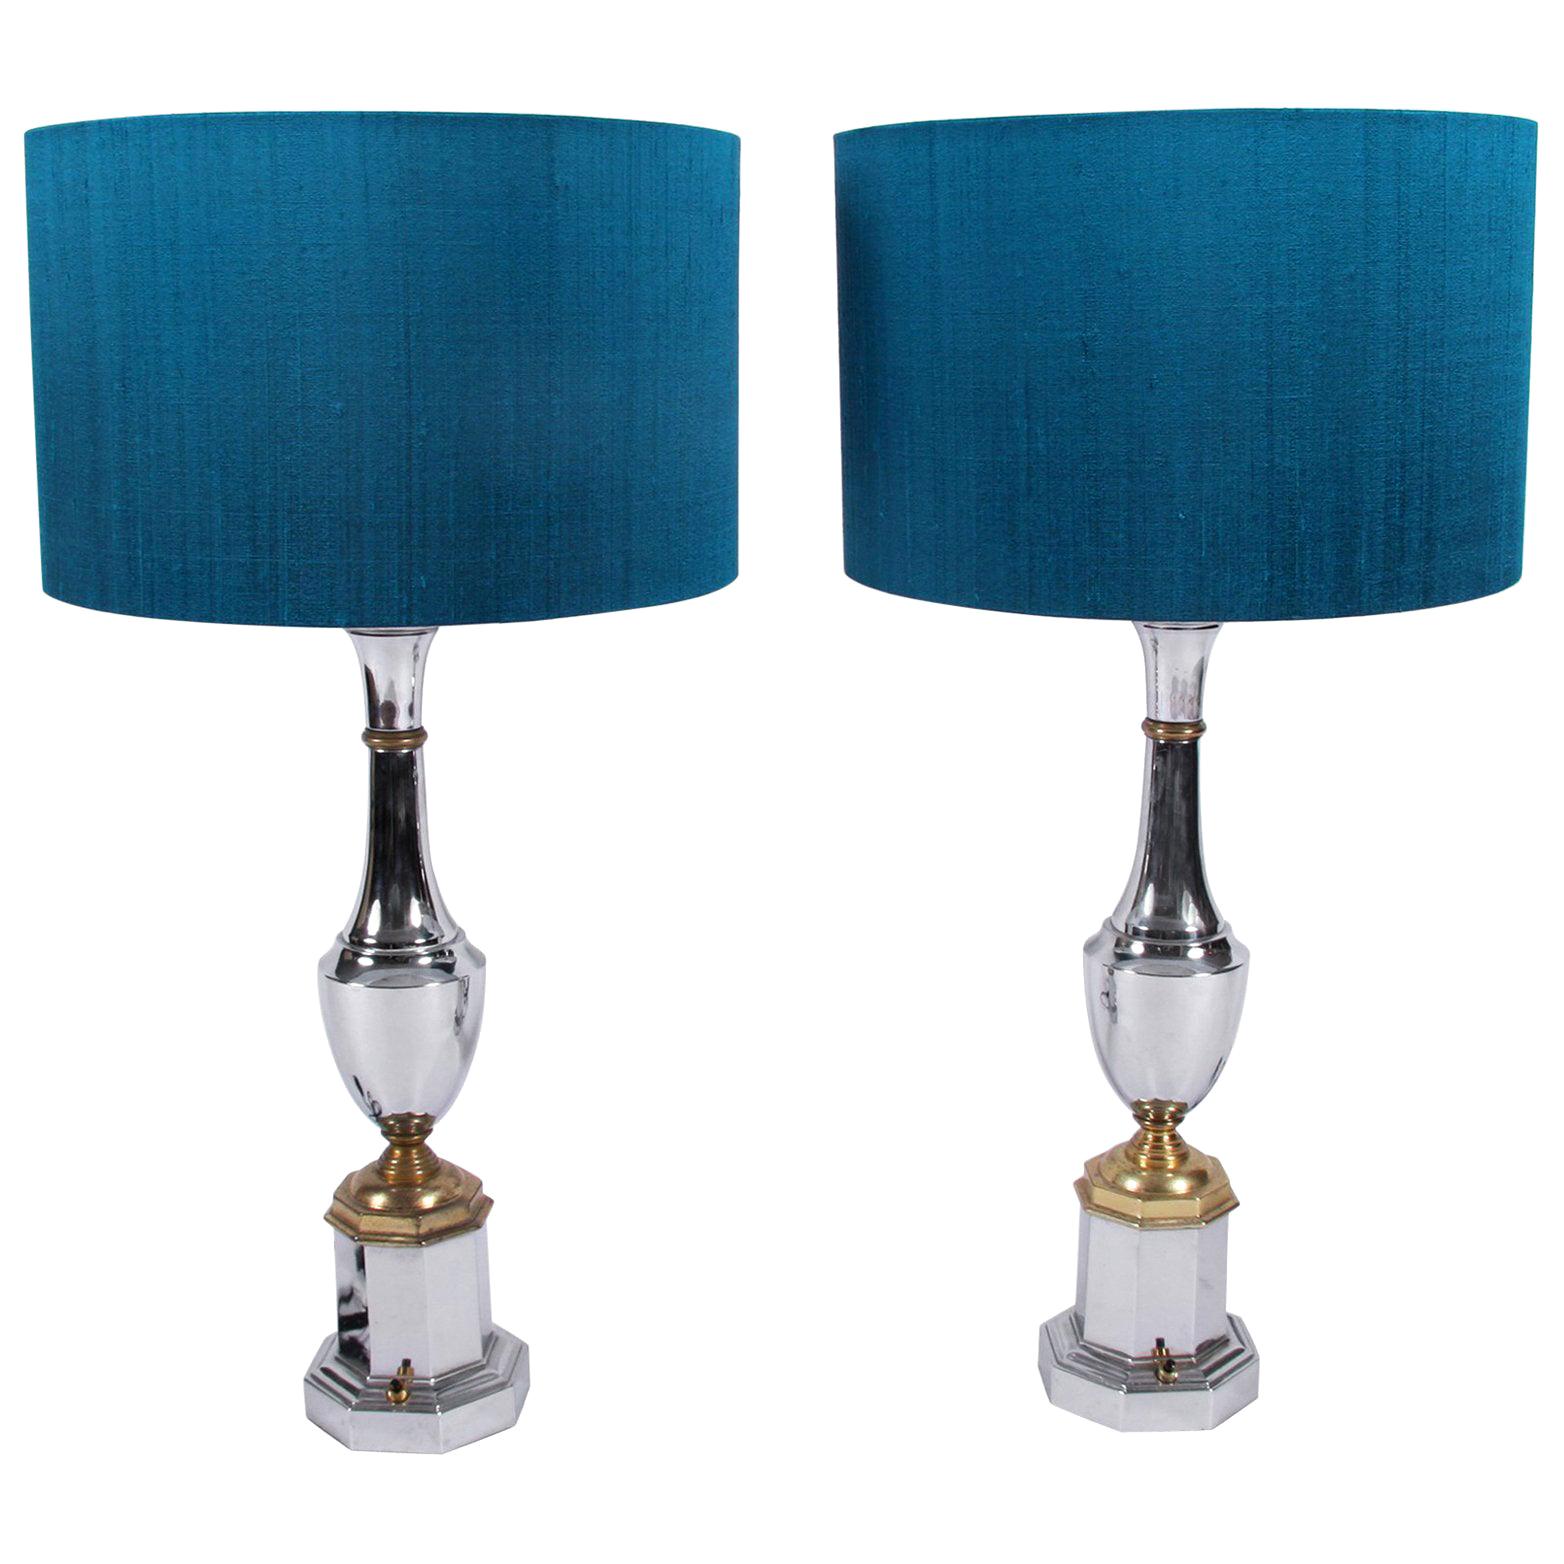 Pair of Midcentury Chrome Table Lamps For Sale